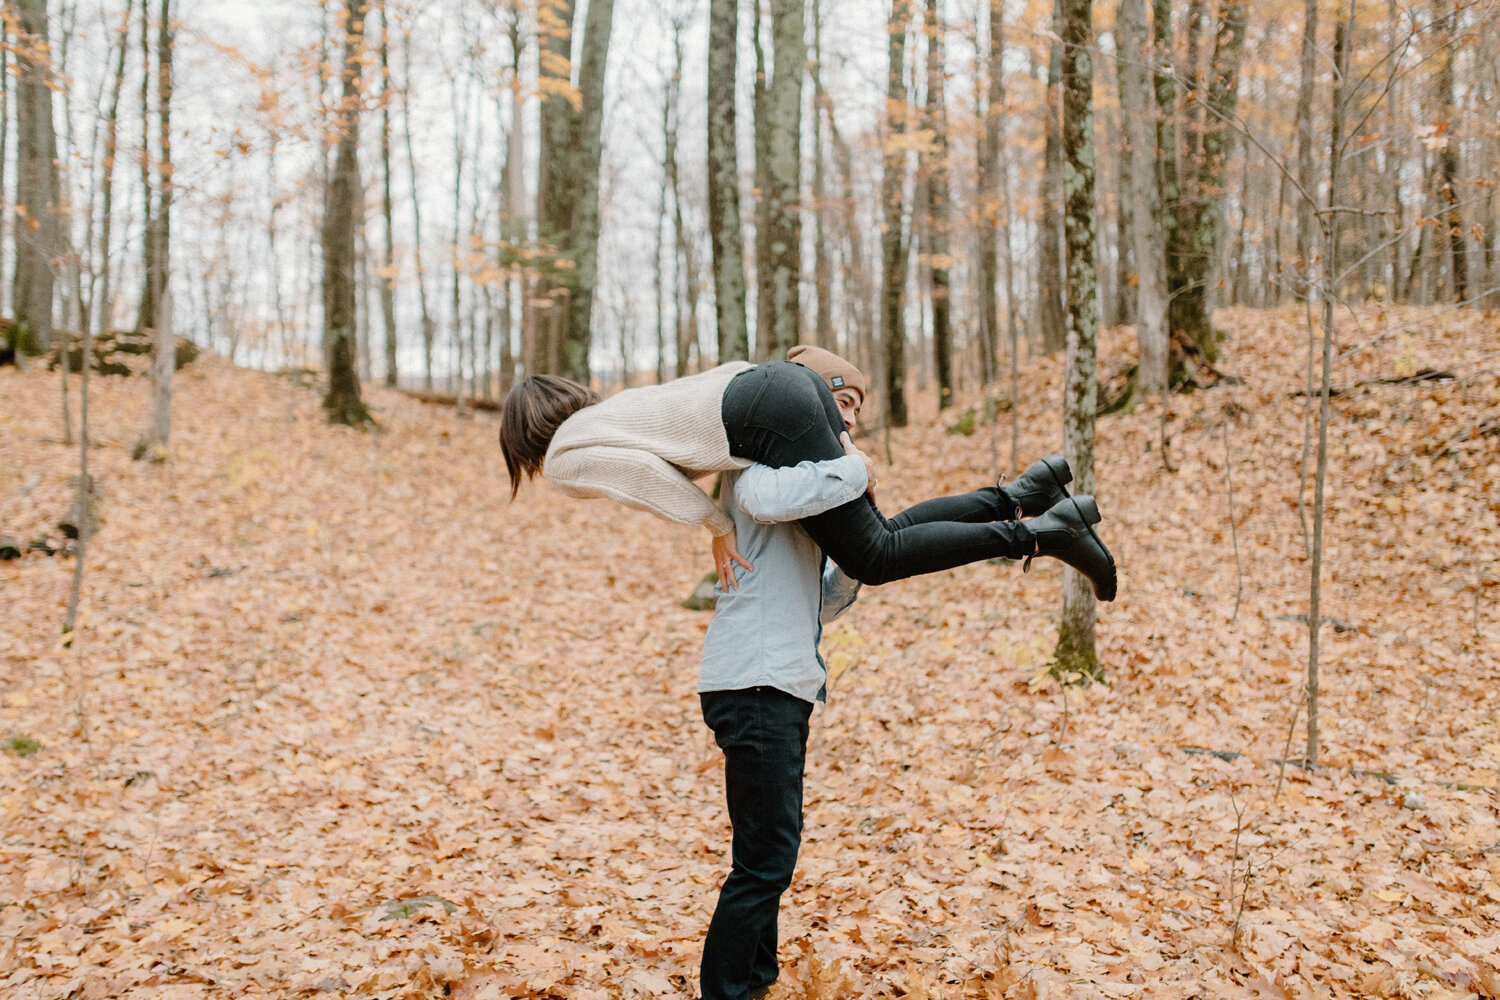  During this playful engagement session in the forrest near Quebec, Canada, Chelsea Mason Photography captures this soon-to-be groom lift and carry his fiance over his shoulder. Laughing engagement photos, silly engagement poses, man lifting woman, a